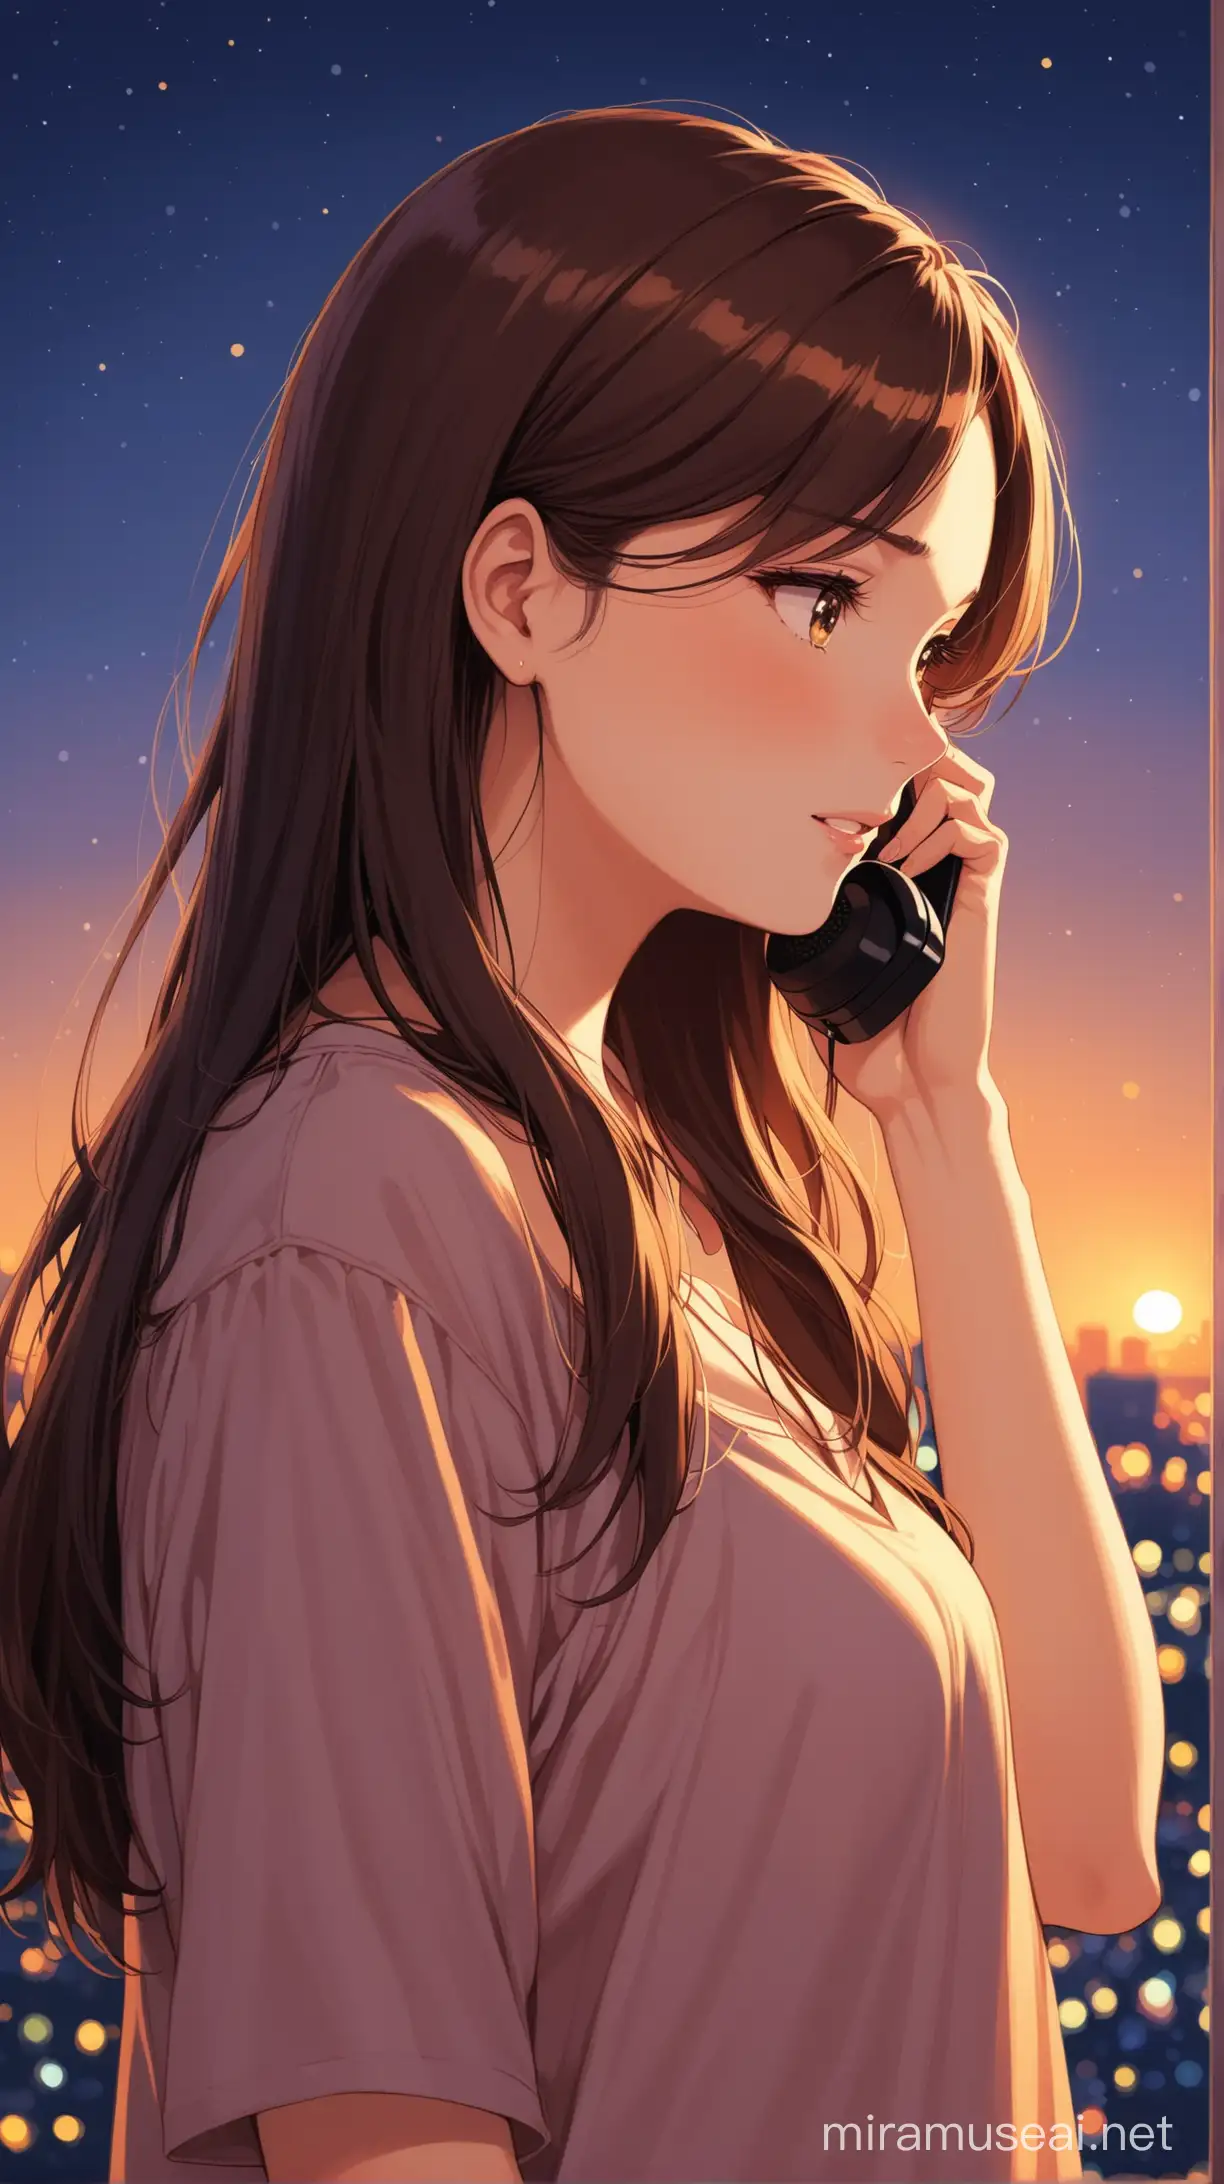 Young Woman Talking to Boyfriend on Phone in Evening